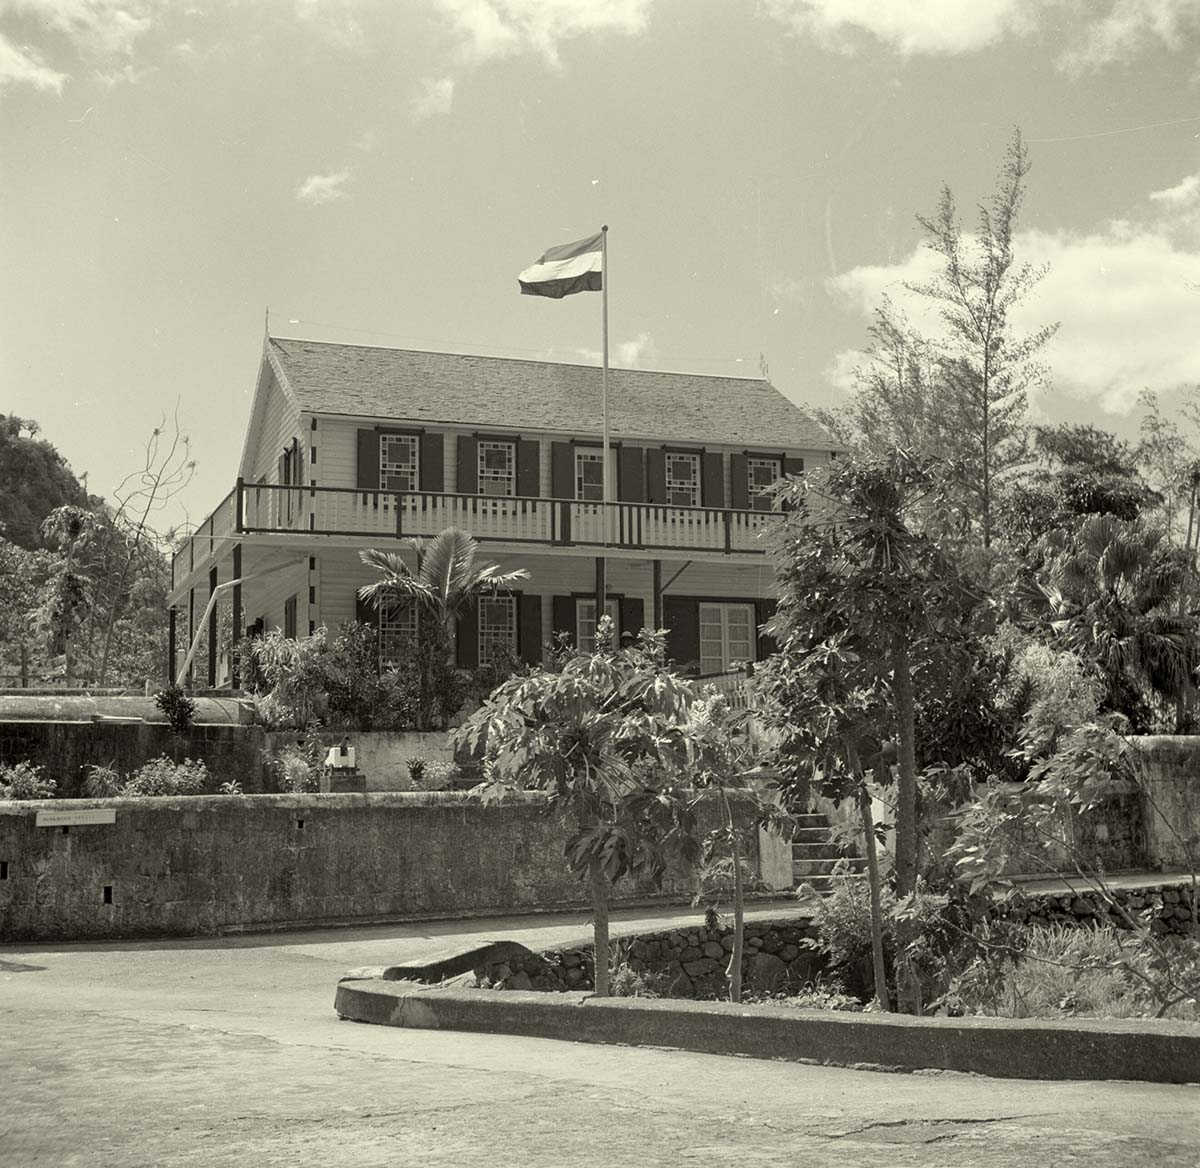 The Bottom. Government guest house, 1947